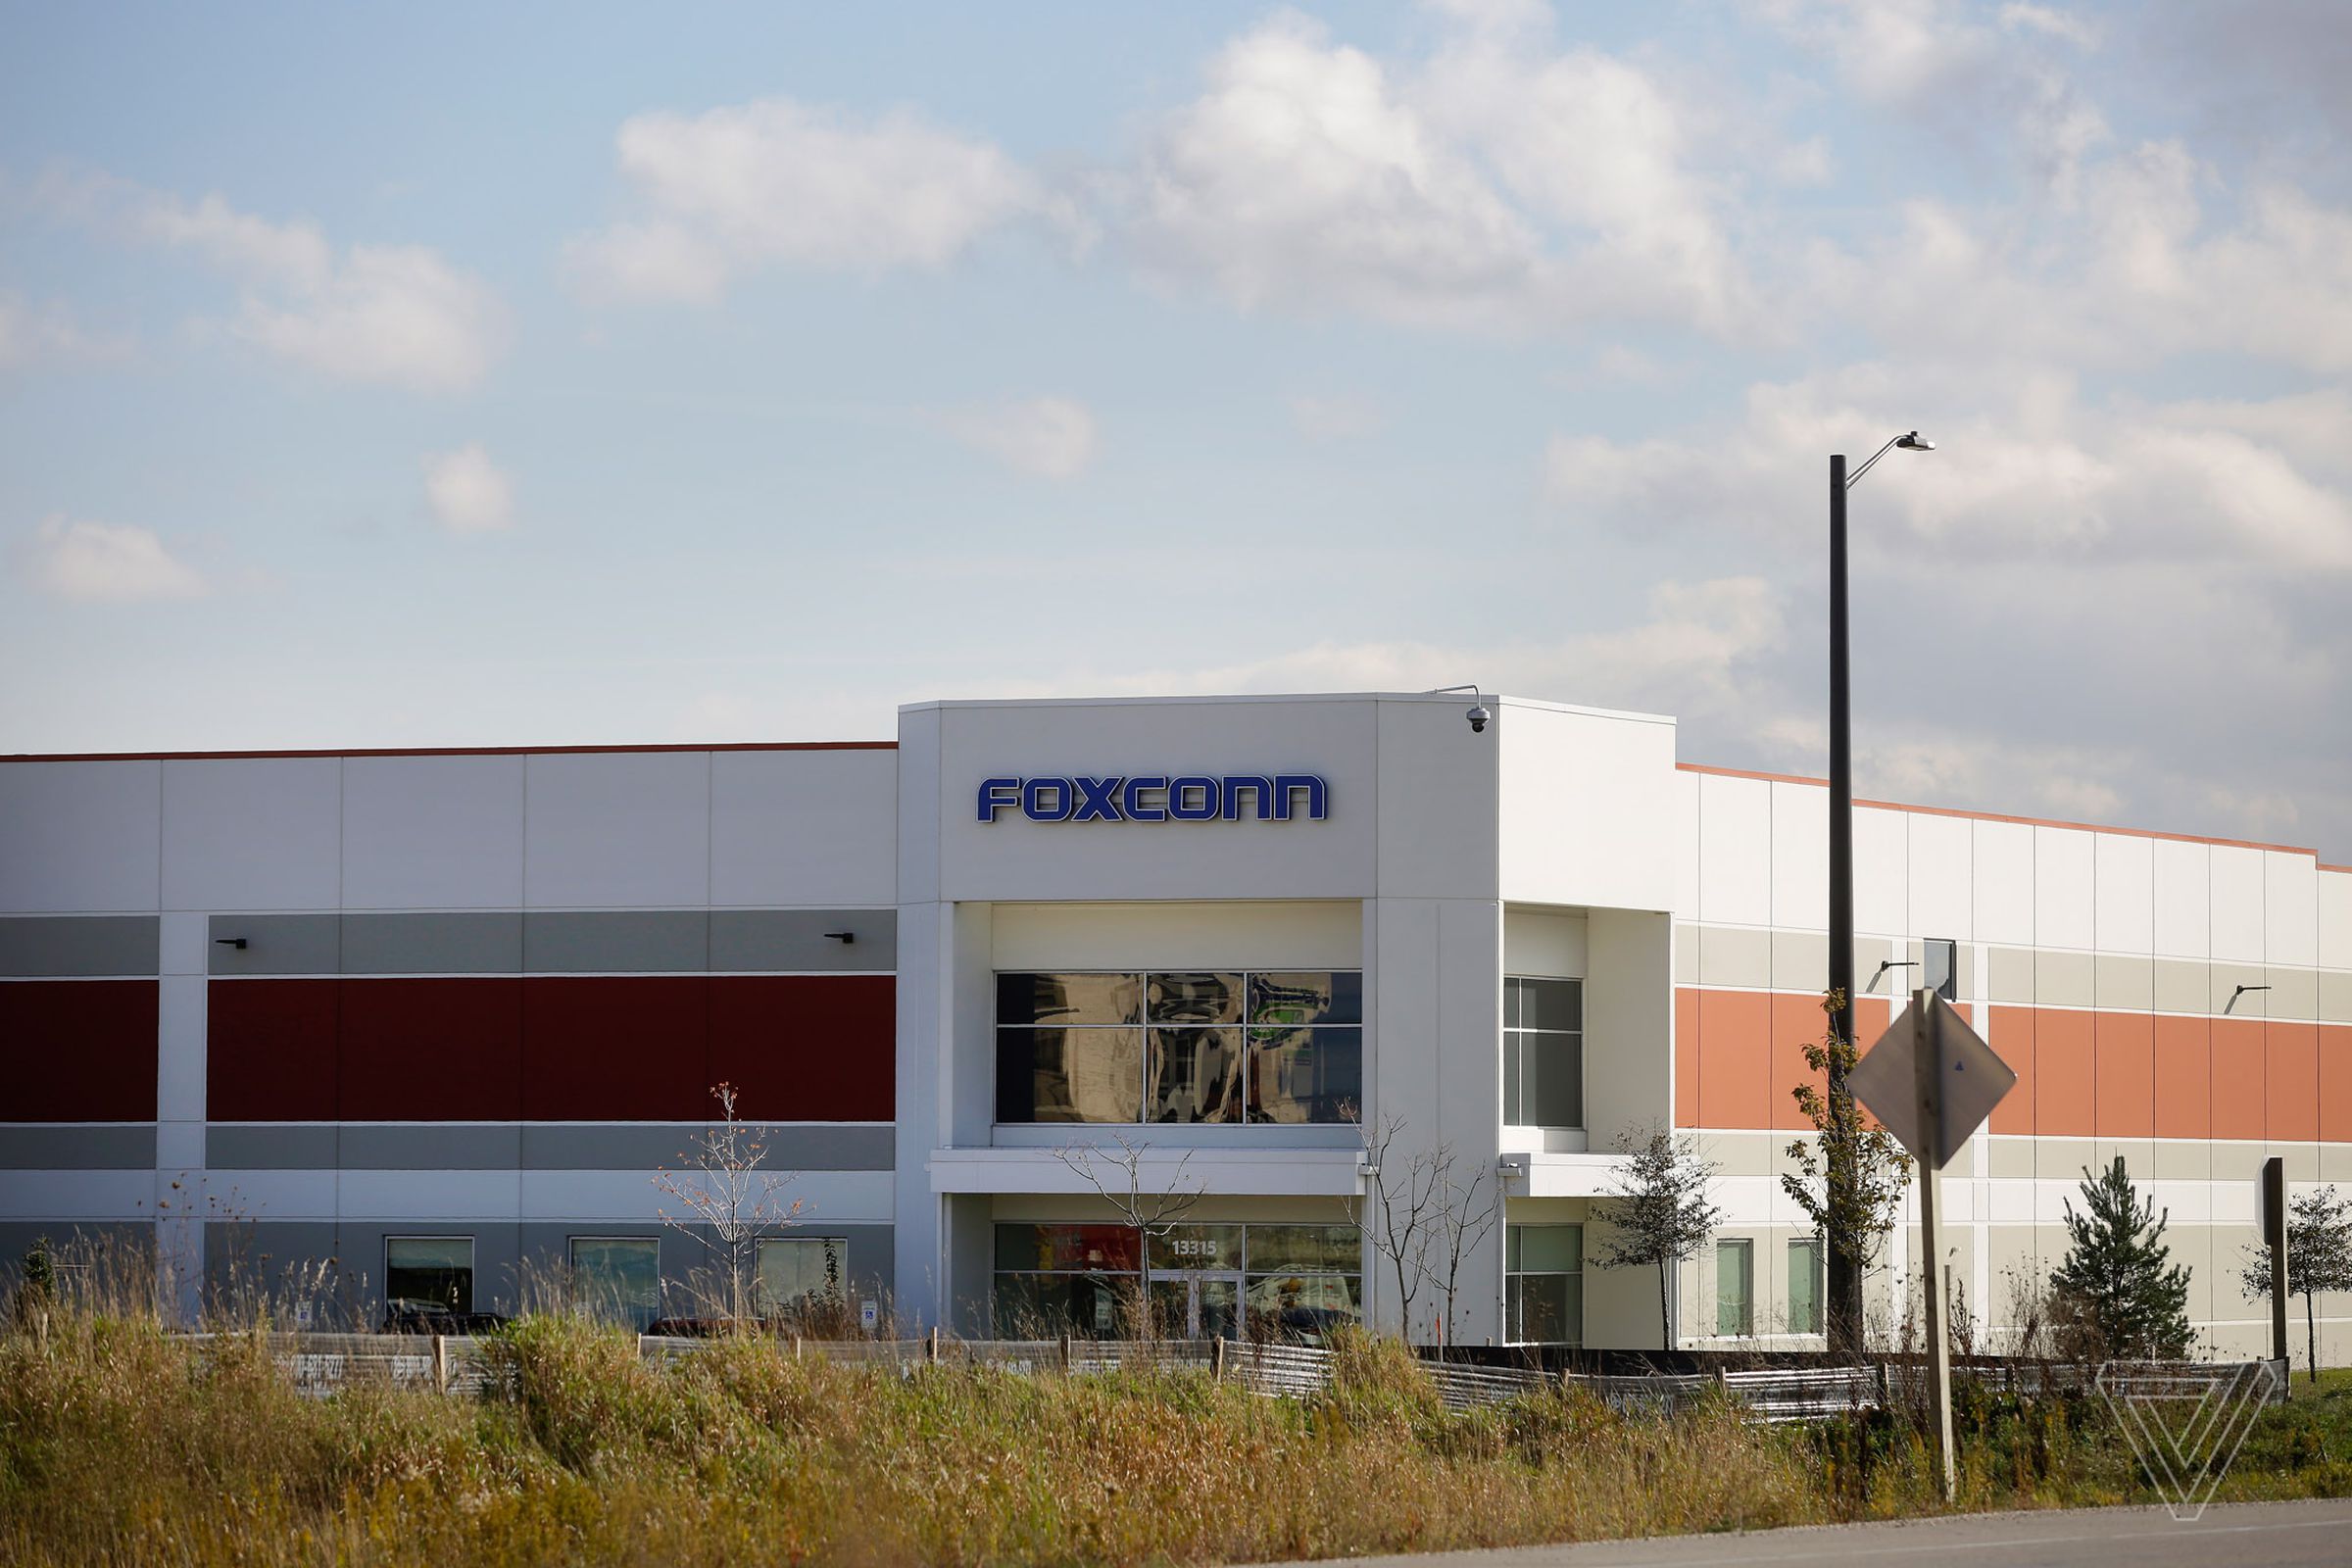 A Foxconn “innovation center” in Wisconsin